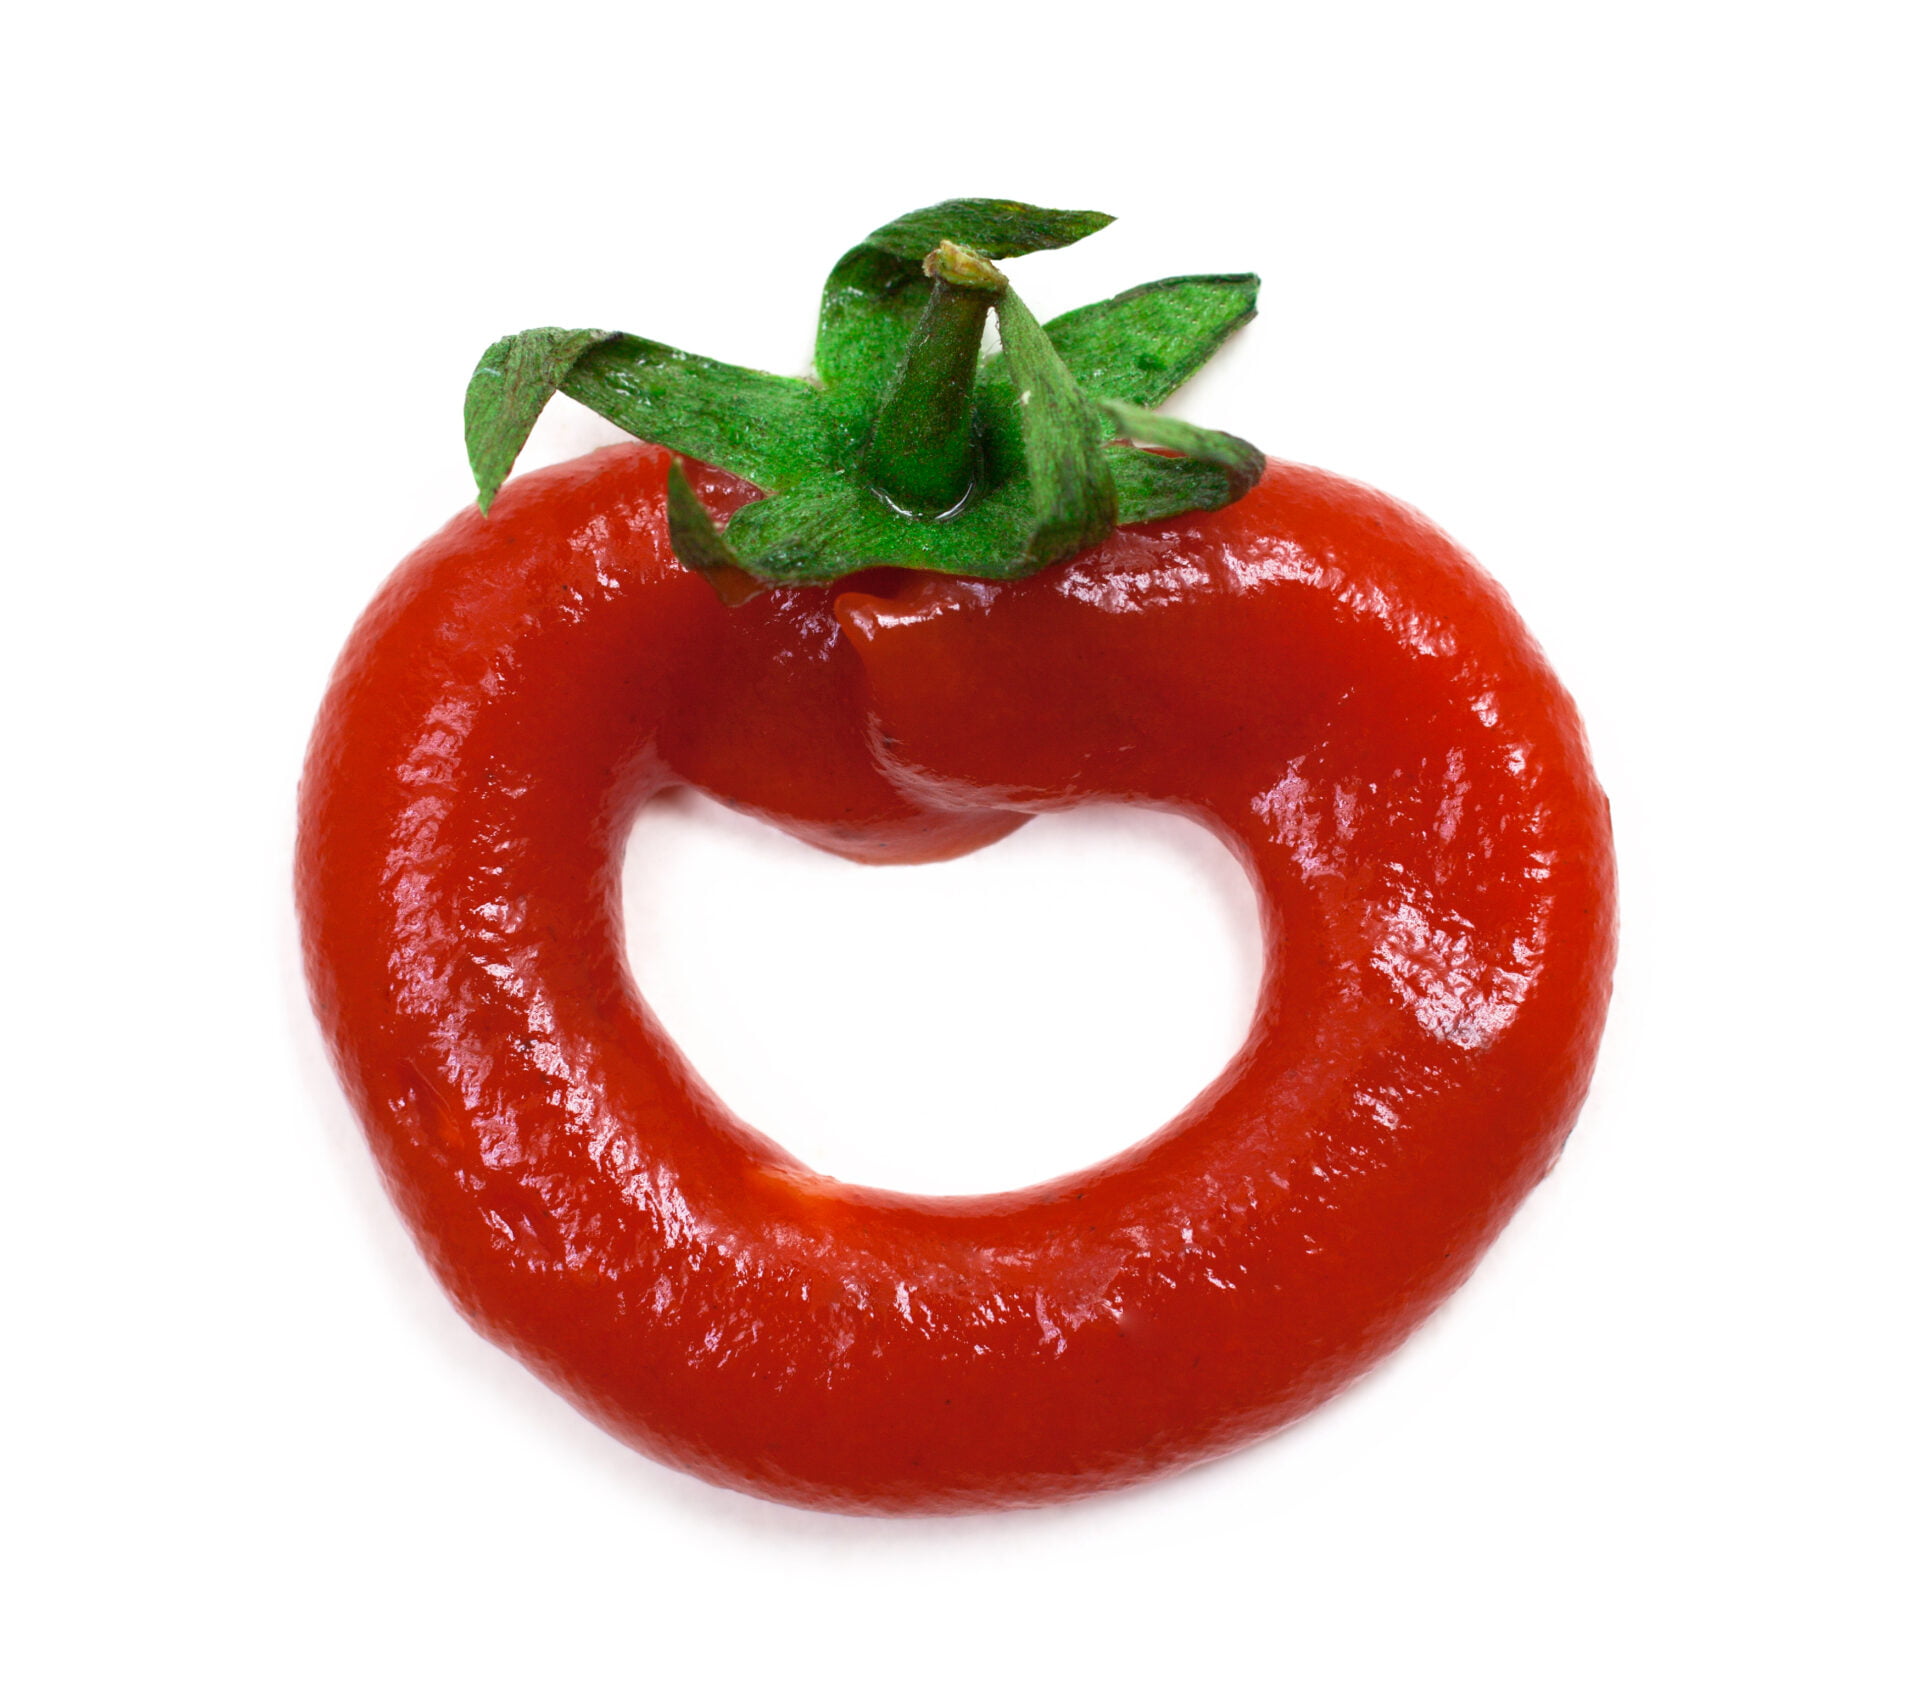 Ketchup and tomato image on white background